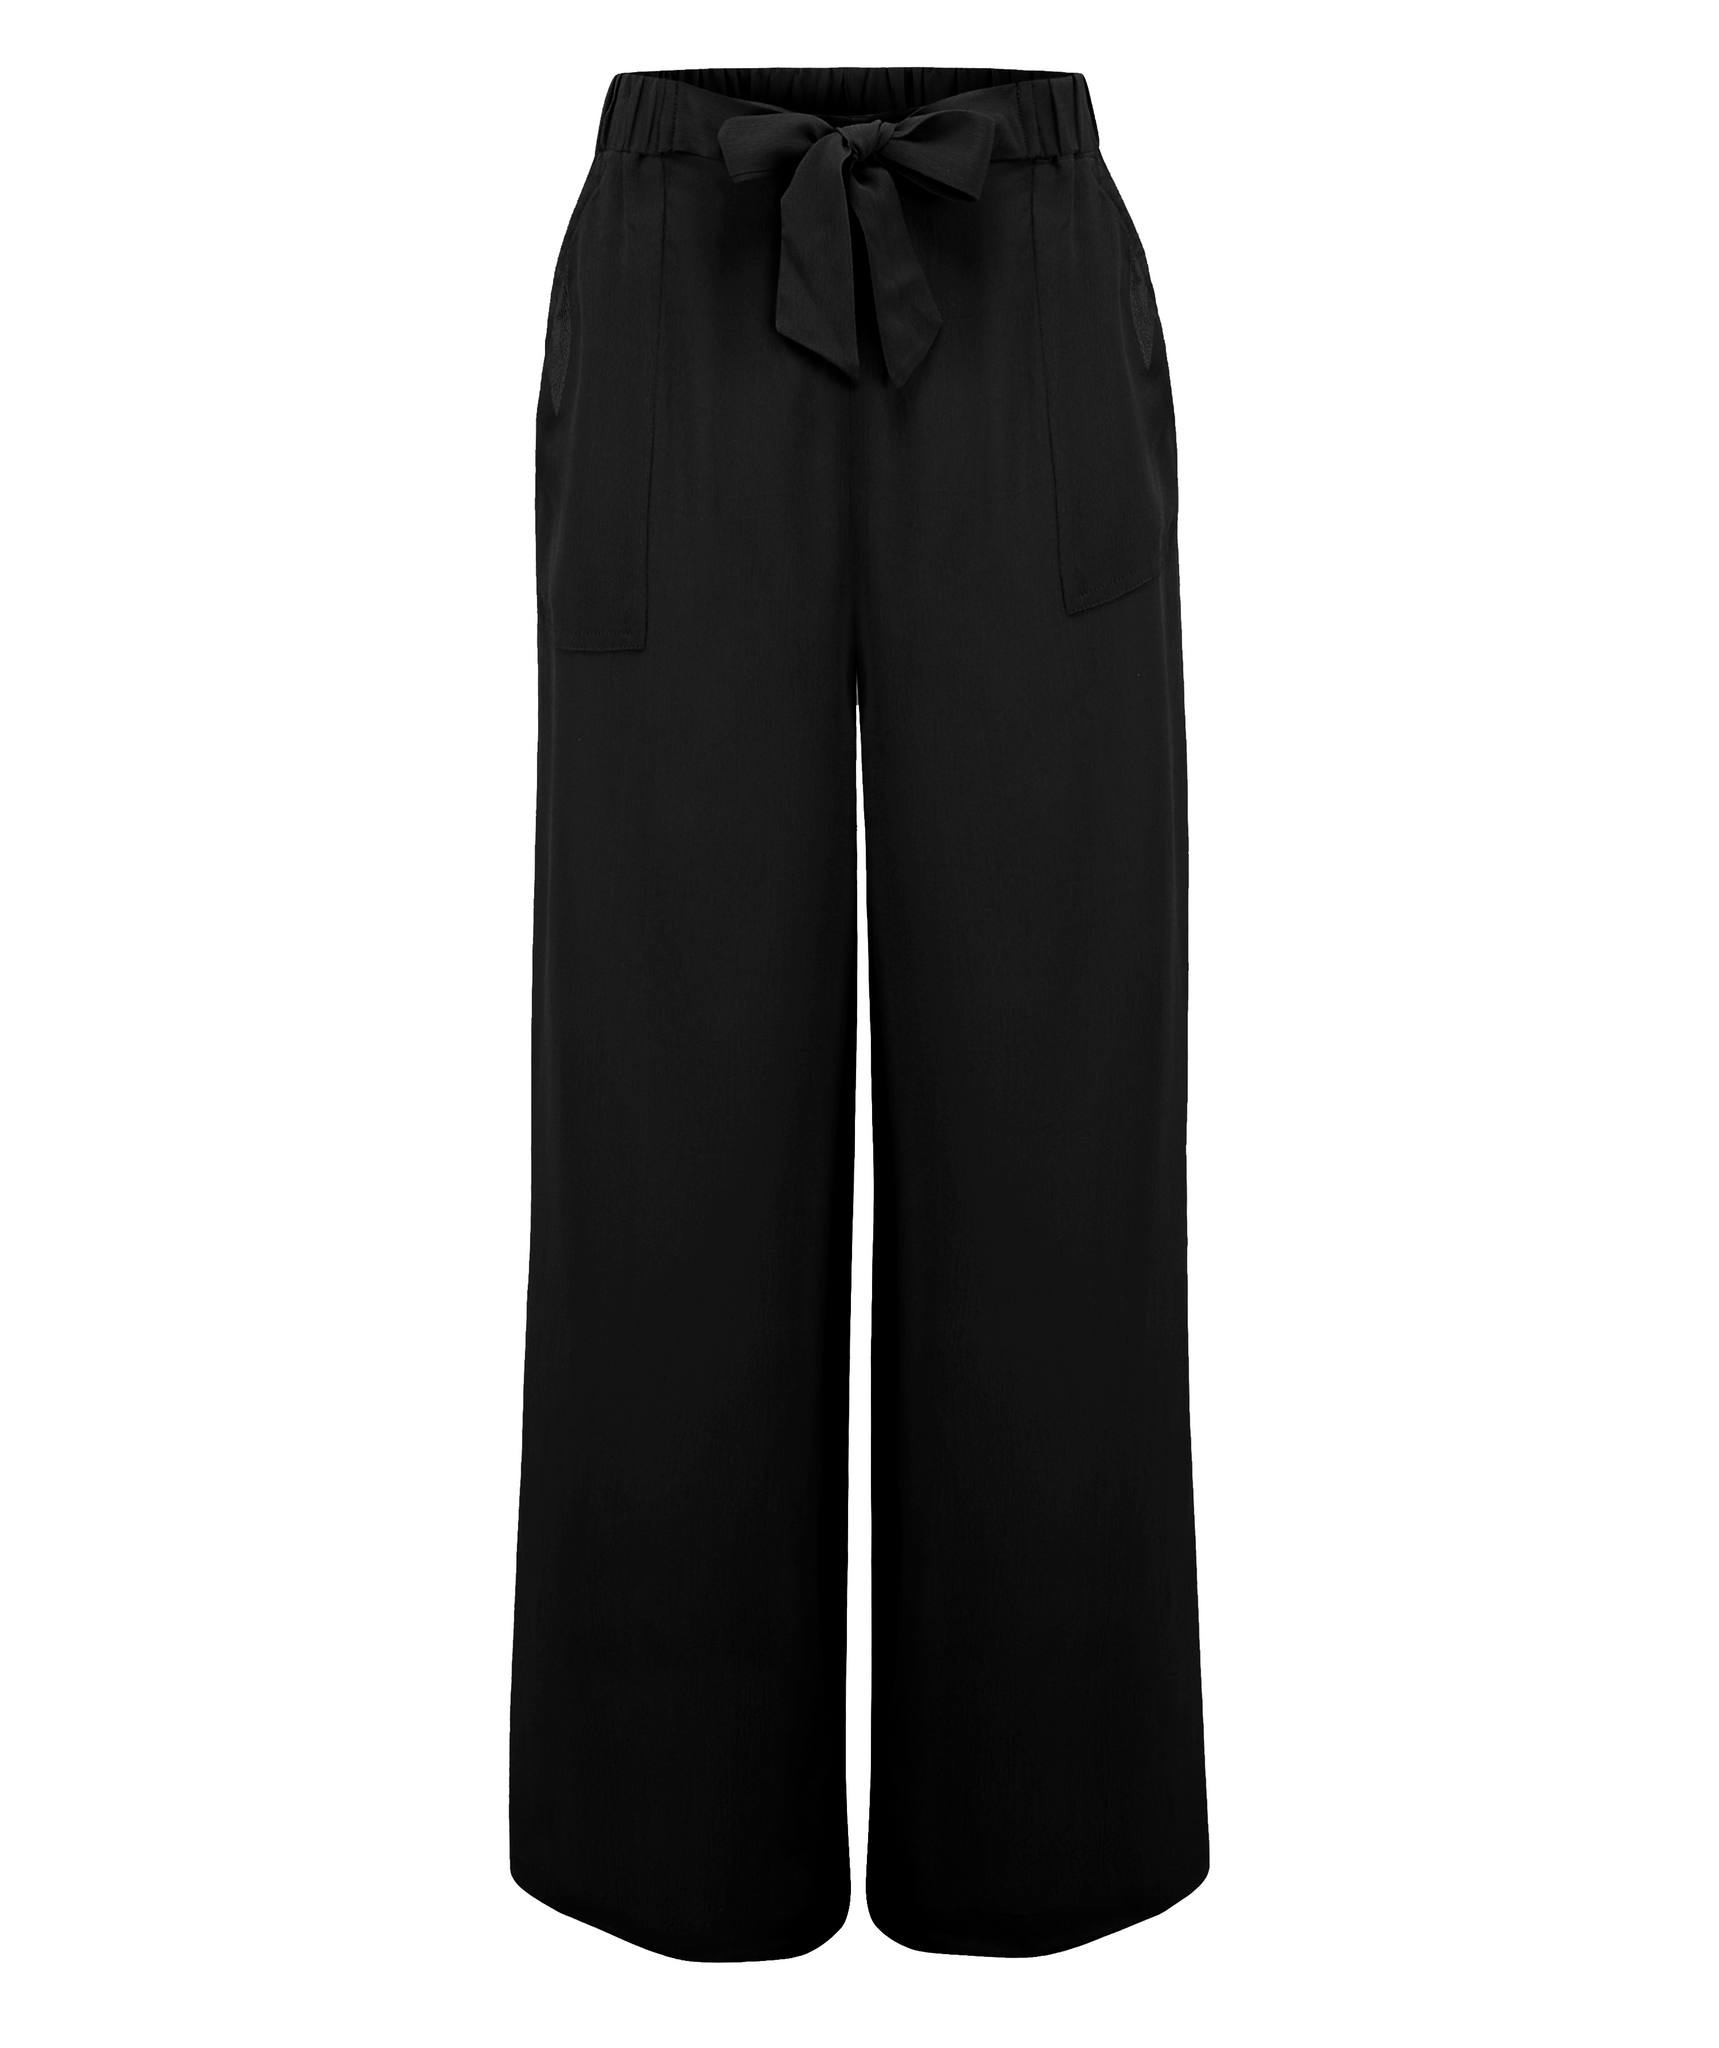 "Winnie" Loose Fit Wide Leg Trousers in Black, Authentic 1940s Style - True and authentic vintage style clothing, inspired by the Classic styles of CC41 , WW2 and the fun 1950s RocknRoll era, for everyday wear plus events like Goodwood Revival, Twinwood Festival and Viva Las Vegas Rockabilly Weekend Rock n Romance The Seamstress Of Bloomsbury